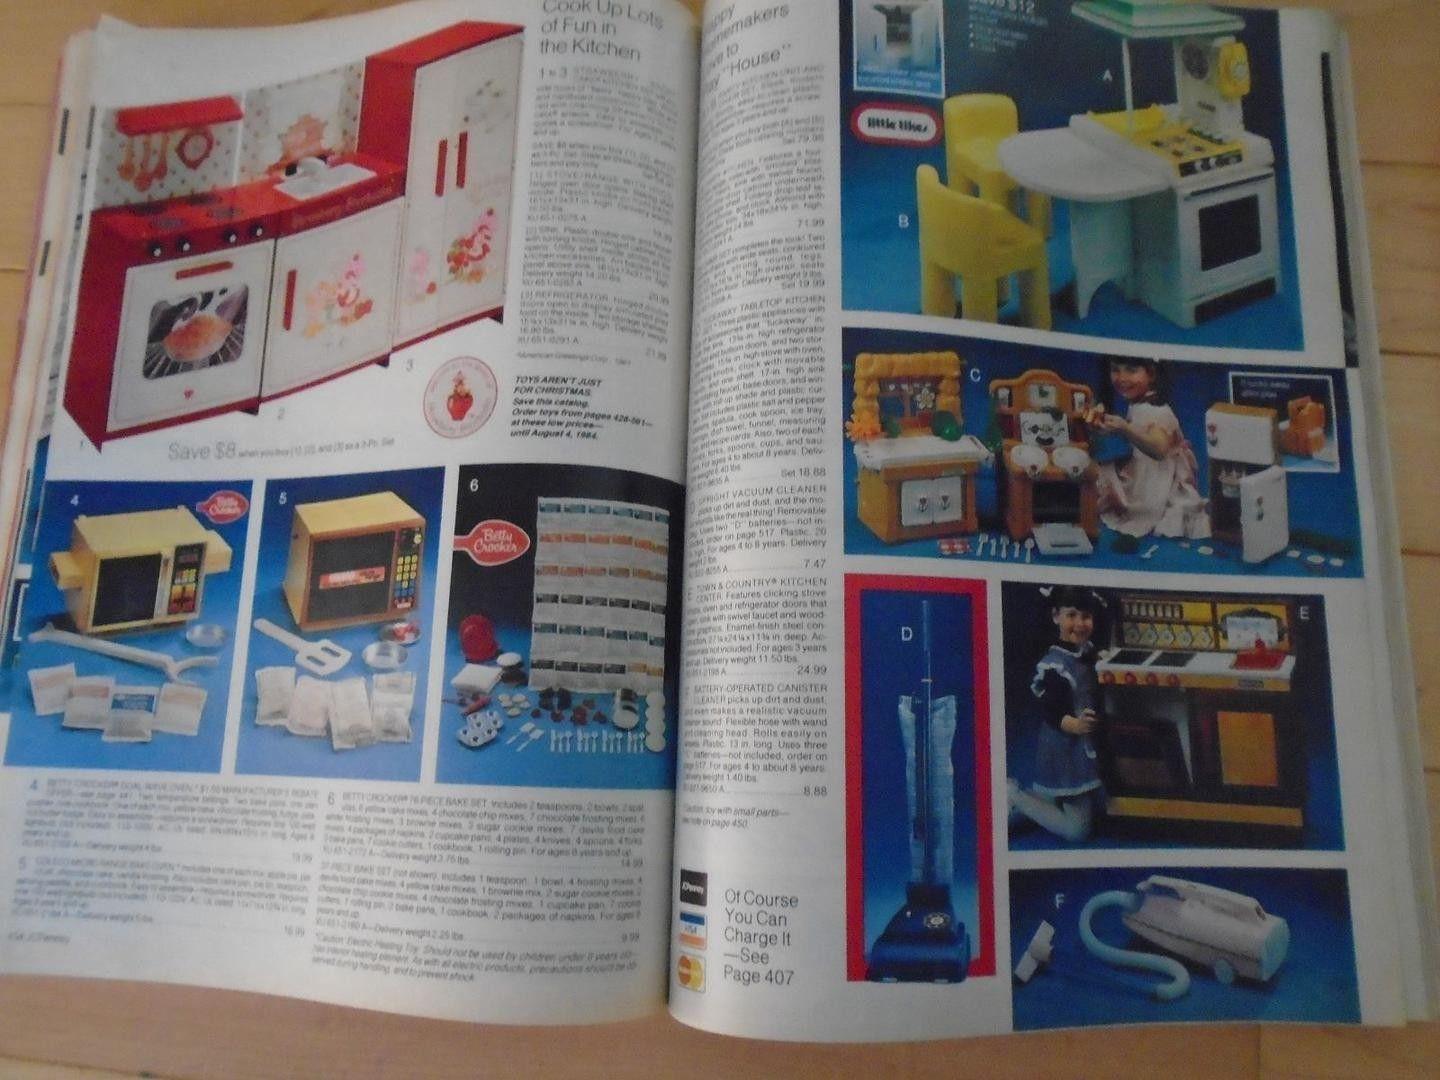 1985 JCPenney Logo - JCPenney Christmas Book Store Catalogs 1983 1985 Toy Reference Wish ...